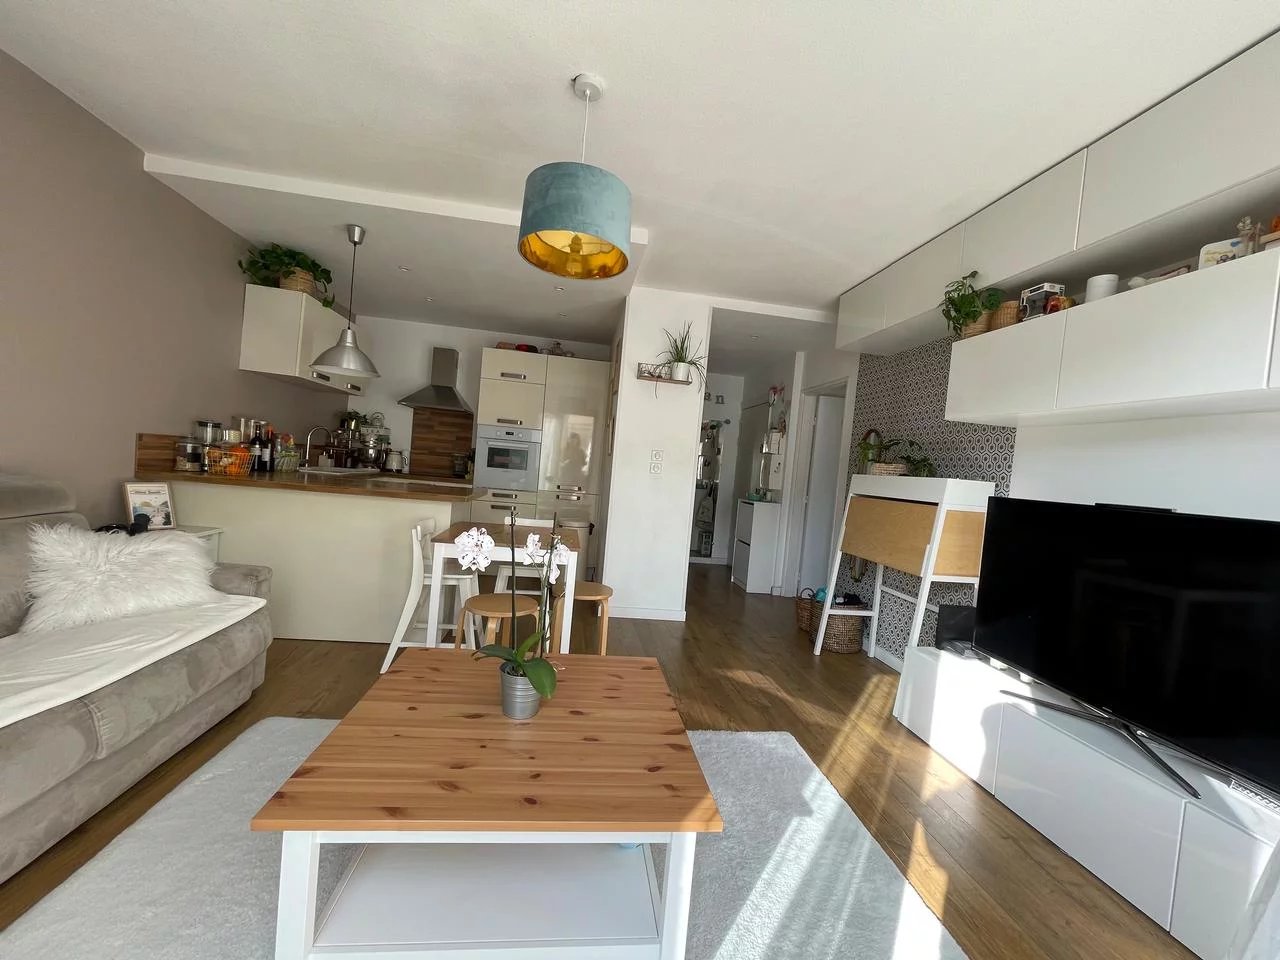 Appartement  2 Rooms 48m2  for sale   259 000 €